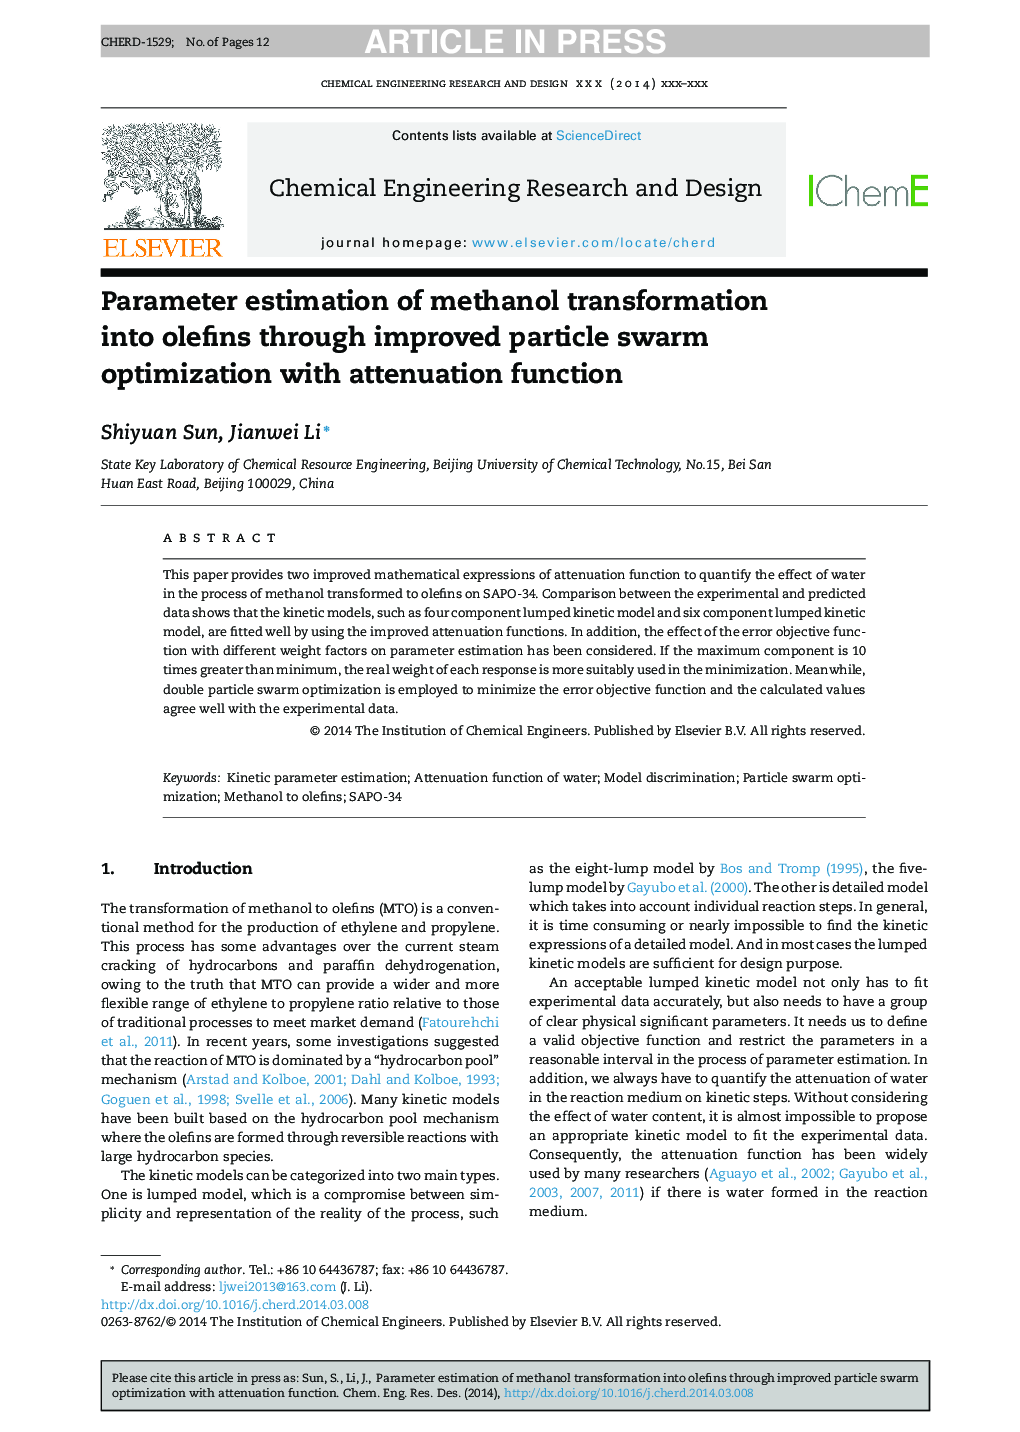 Parameter estimation of methanol transformation into olefins through improved particle swarm optimization with attenuation function